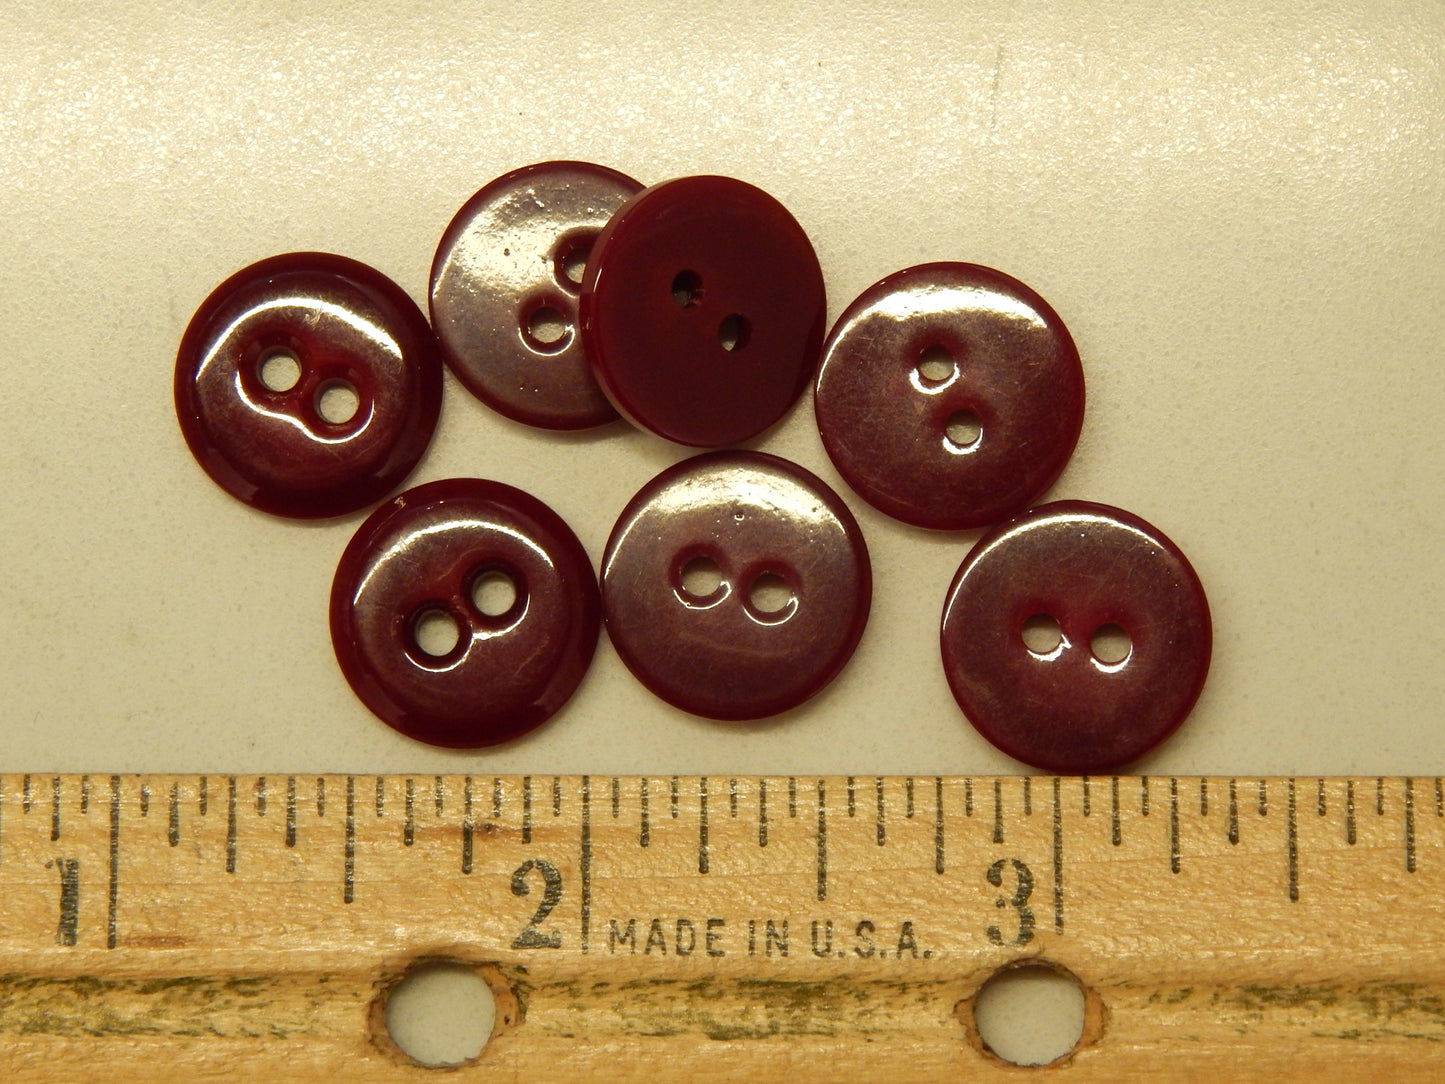 Glassy Red Buttons